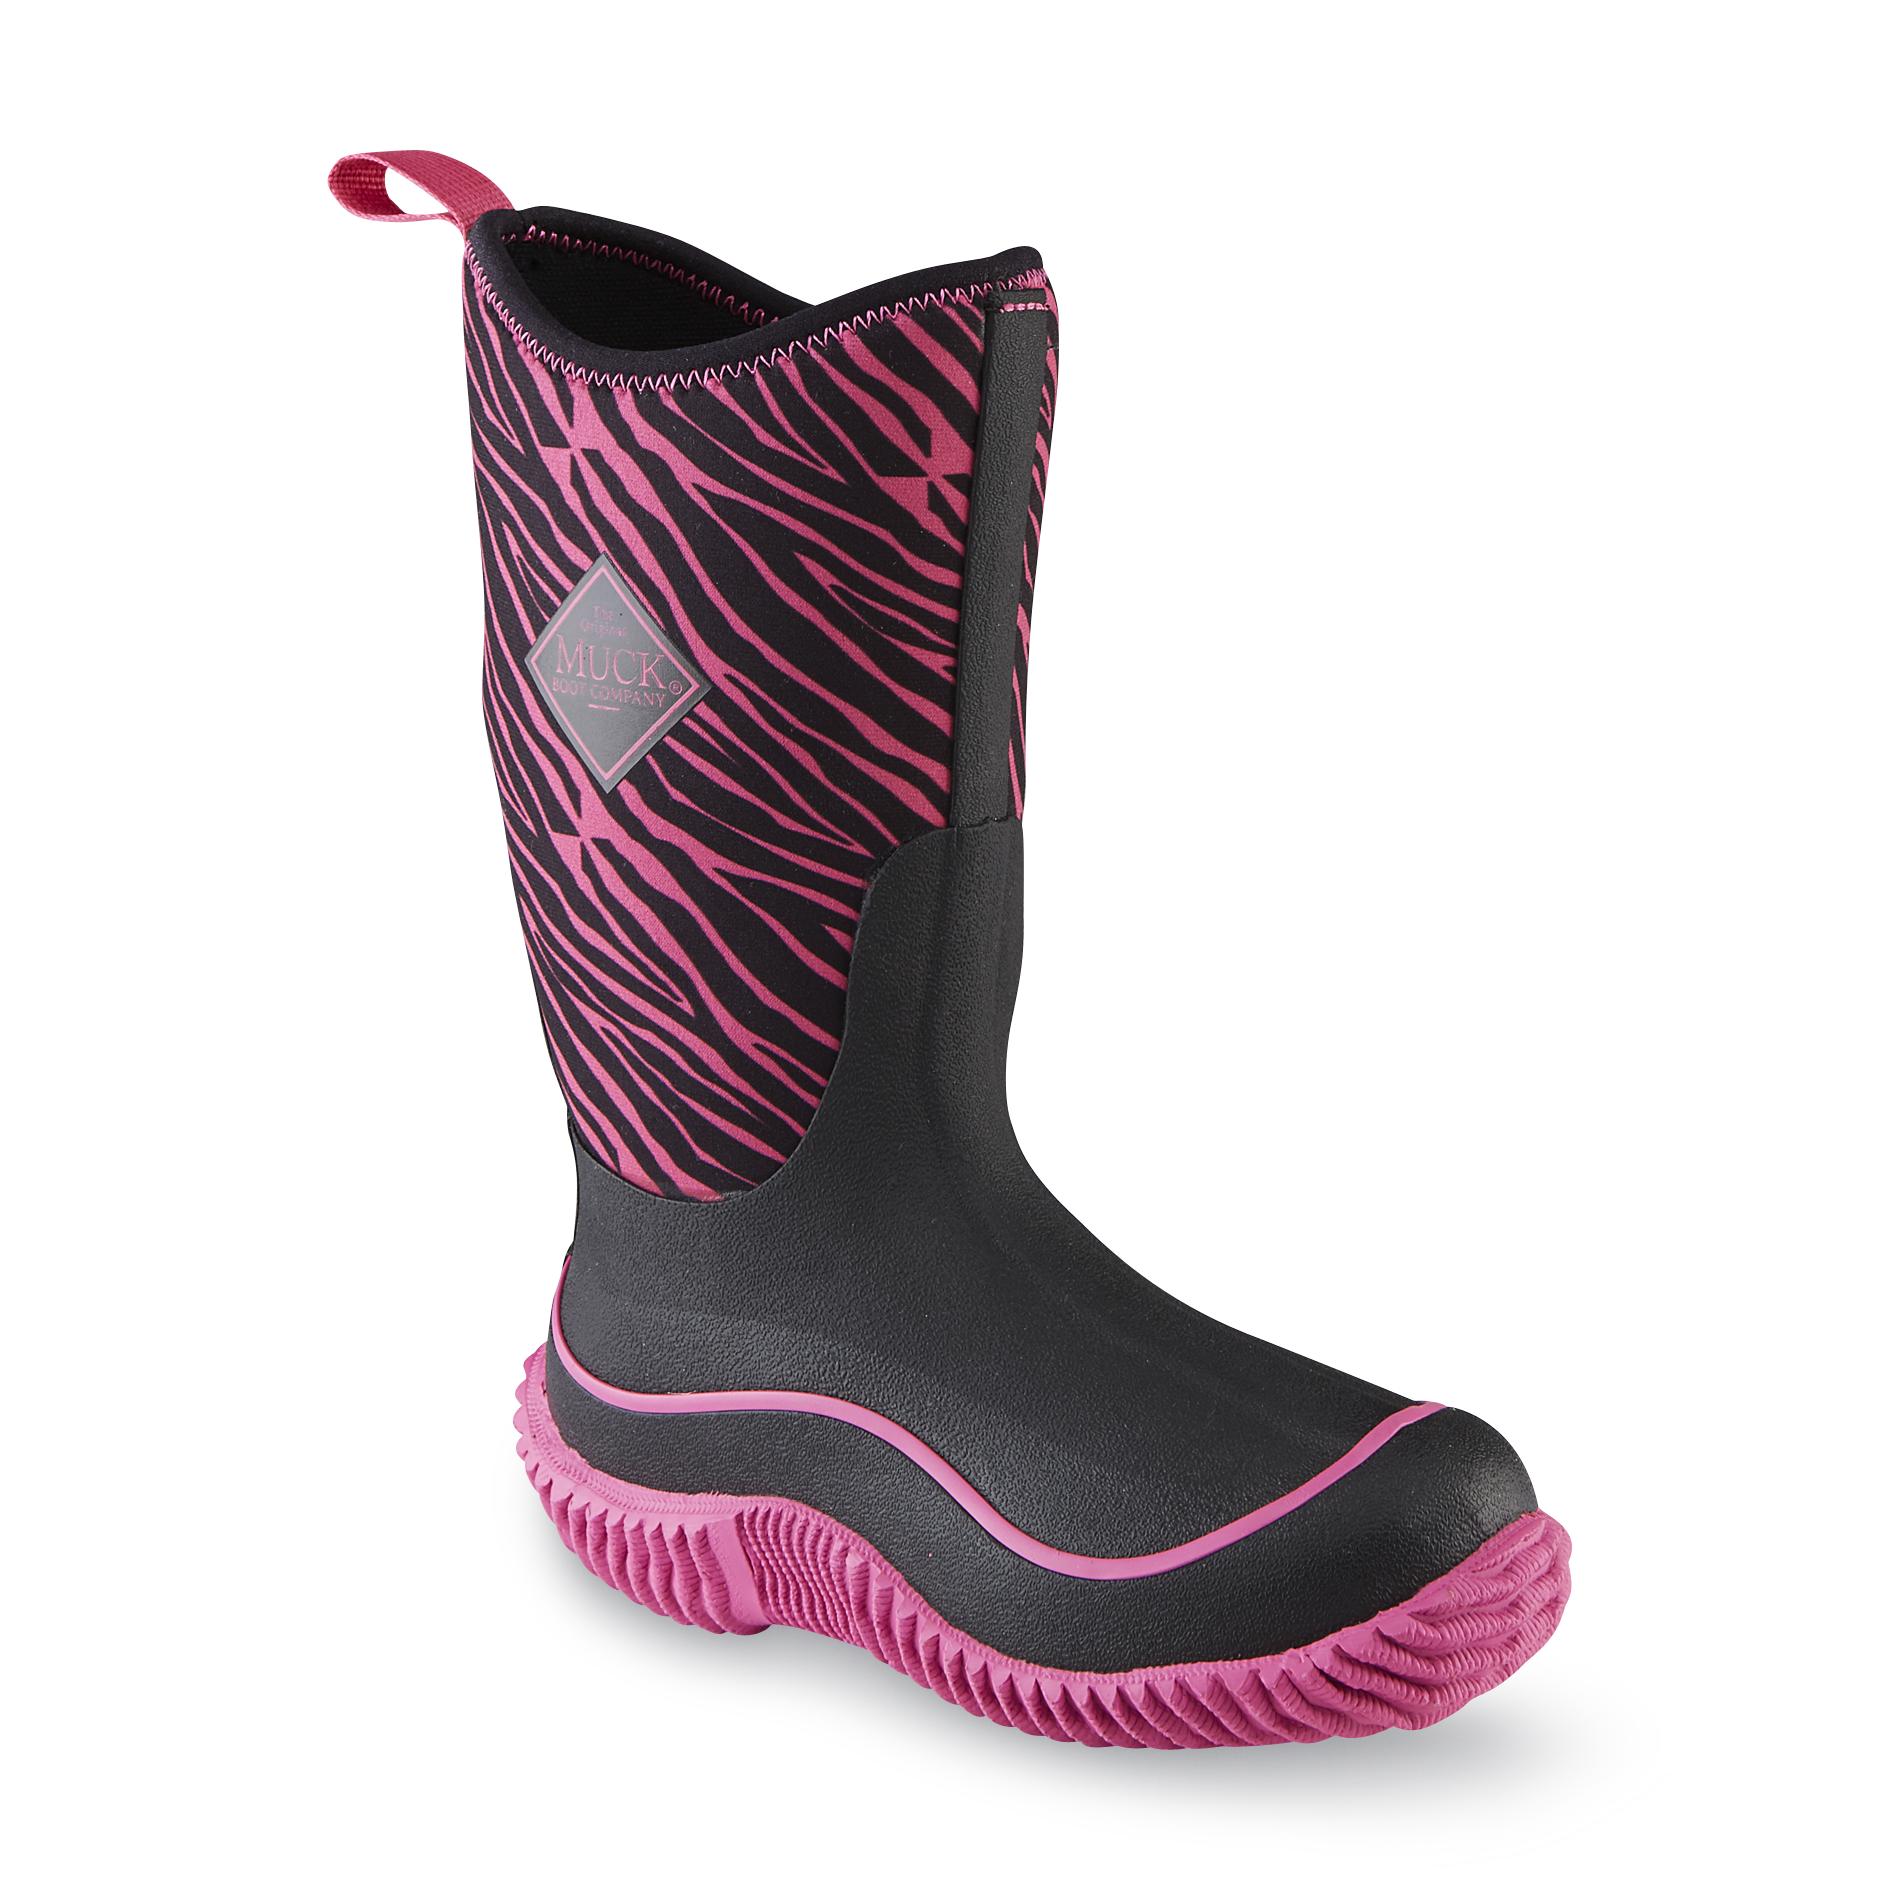 The Original Muck Boot Company Toddler Girl's Hale Pink/Black Waterproof Calf-High Weather Boot